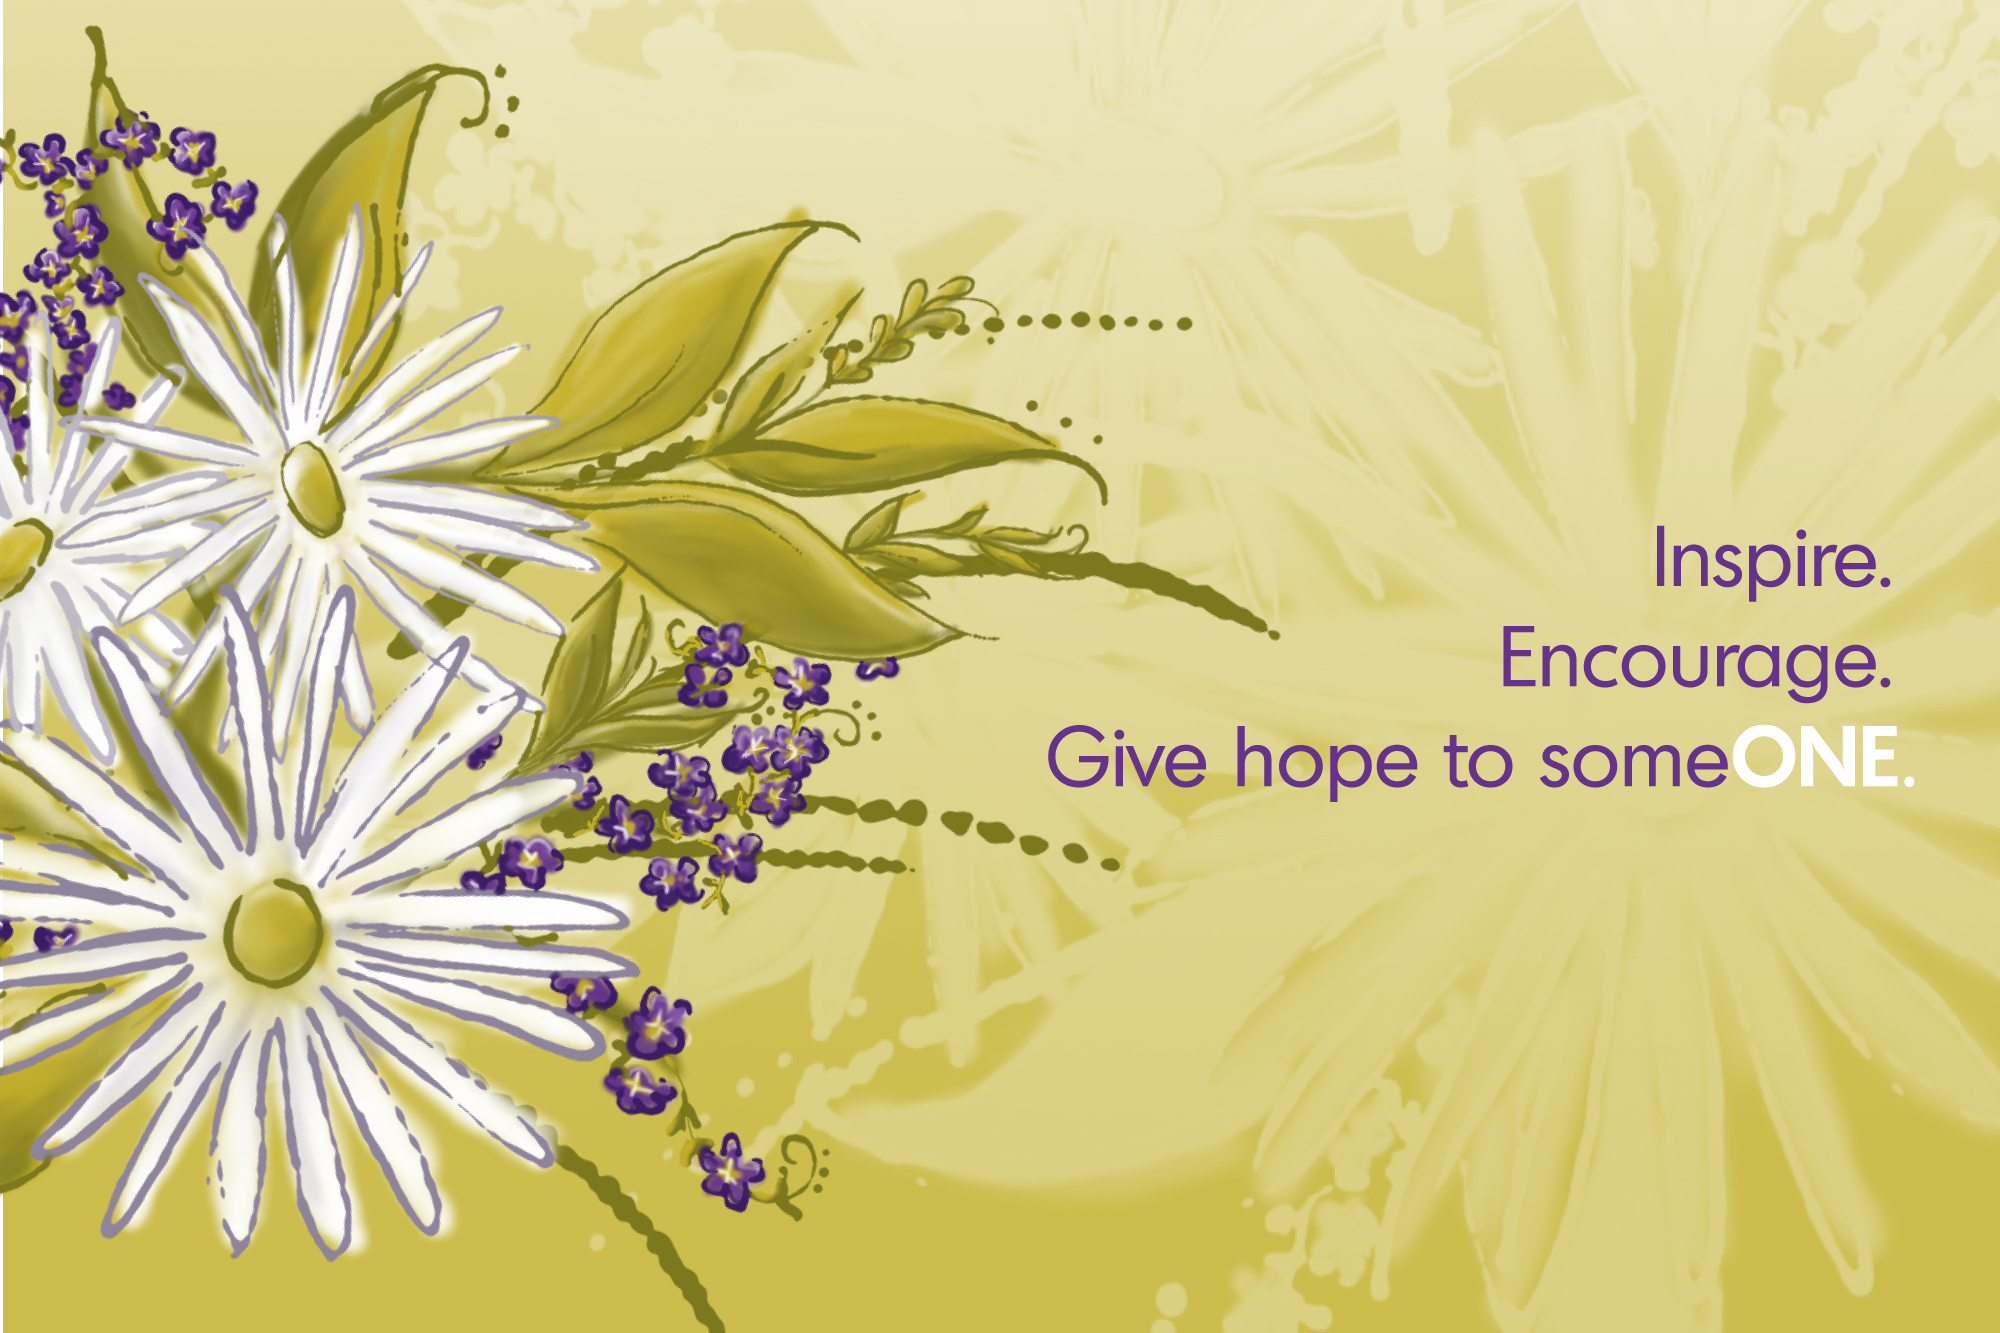 Inspire. Encourage. Give hope to someONE.